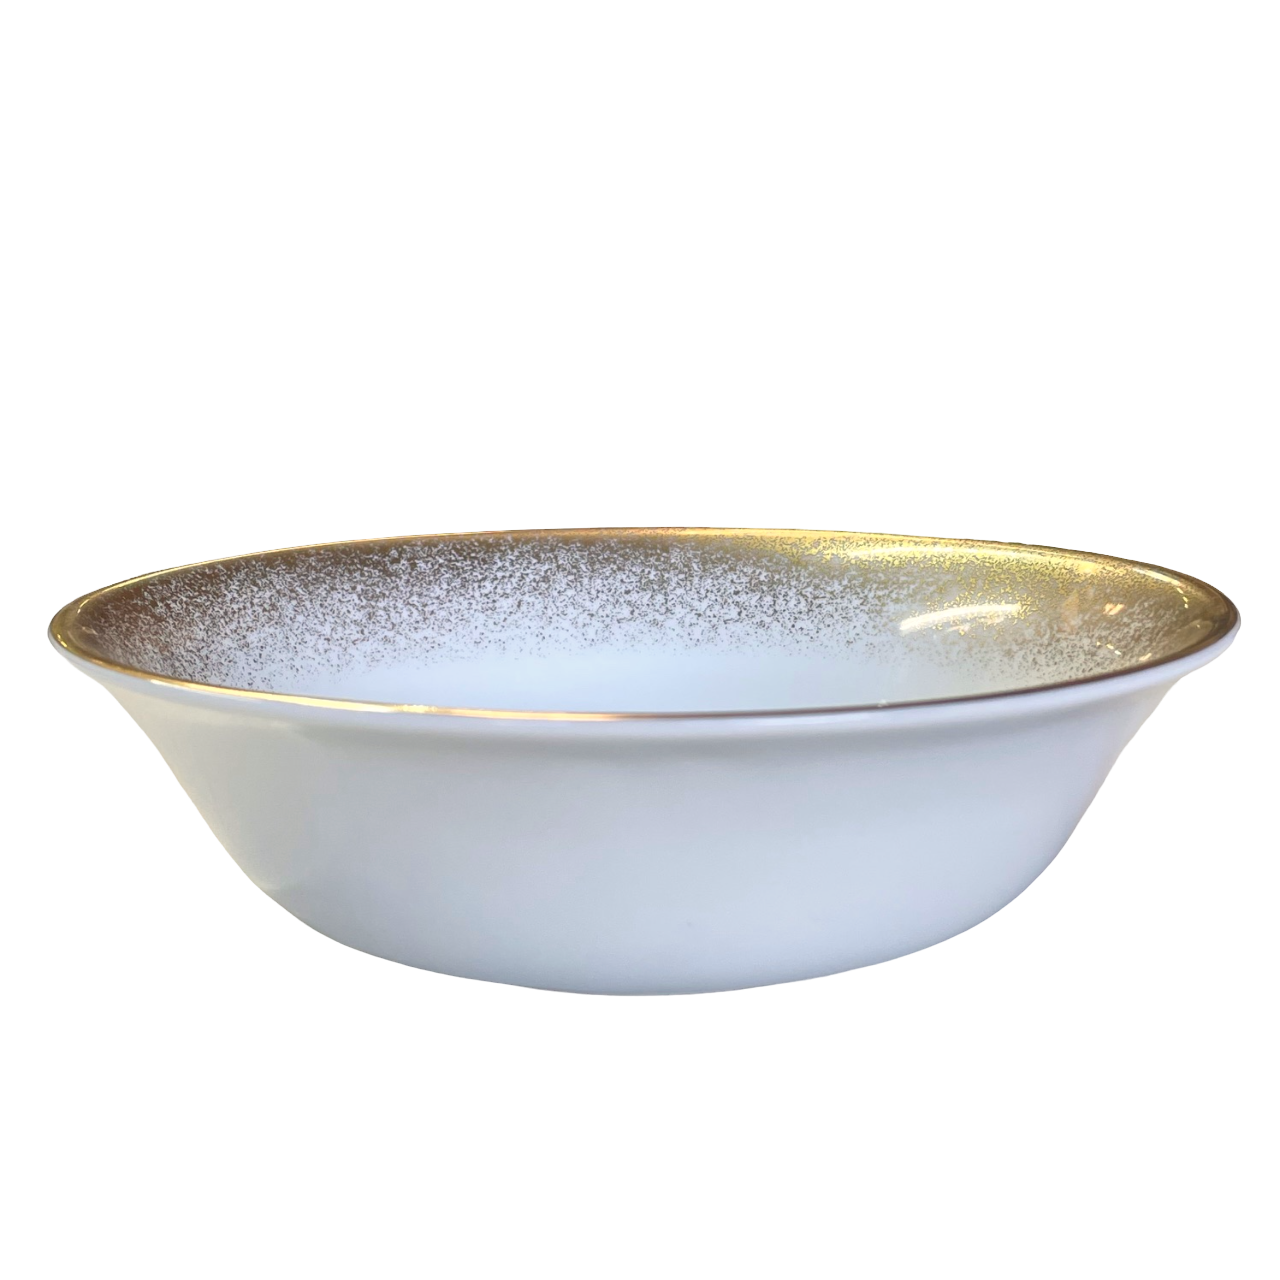 Gold fire - Cereal bowl 19 cm